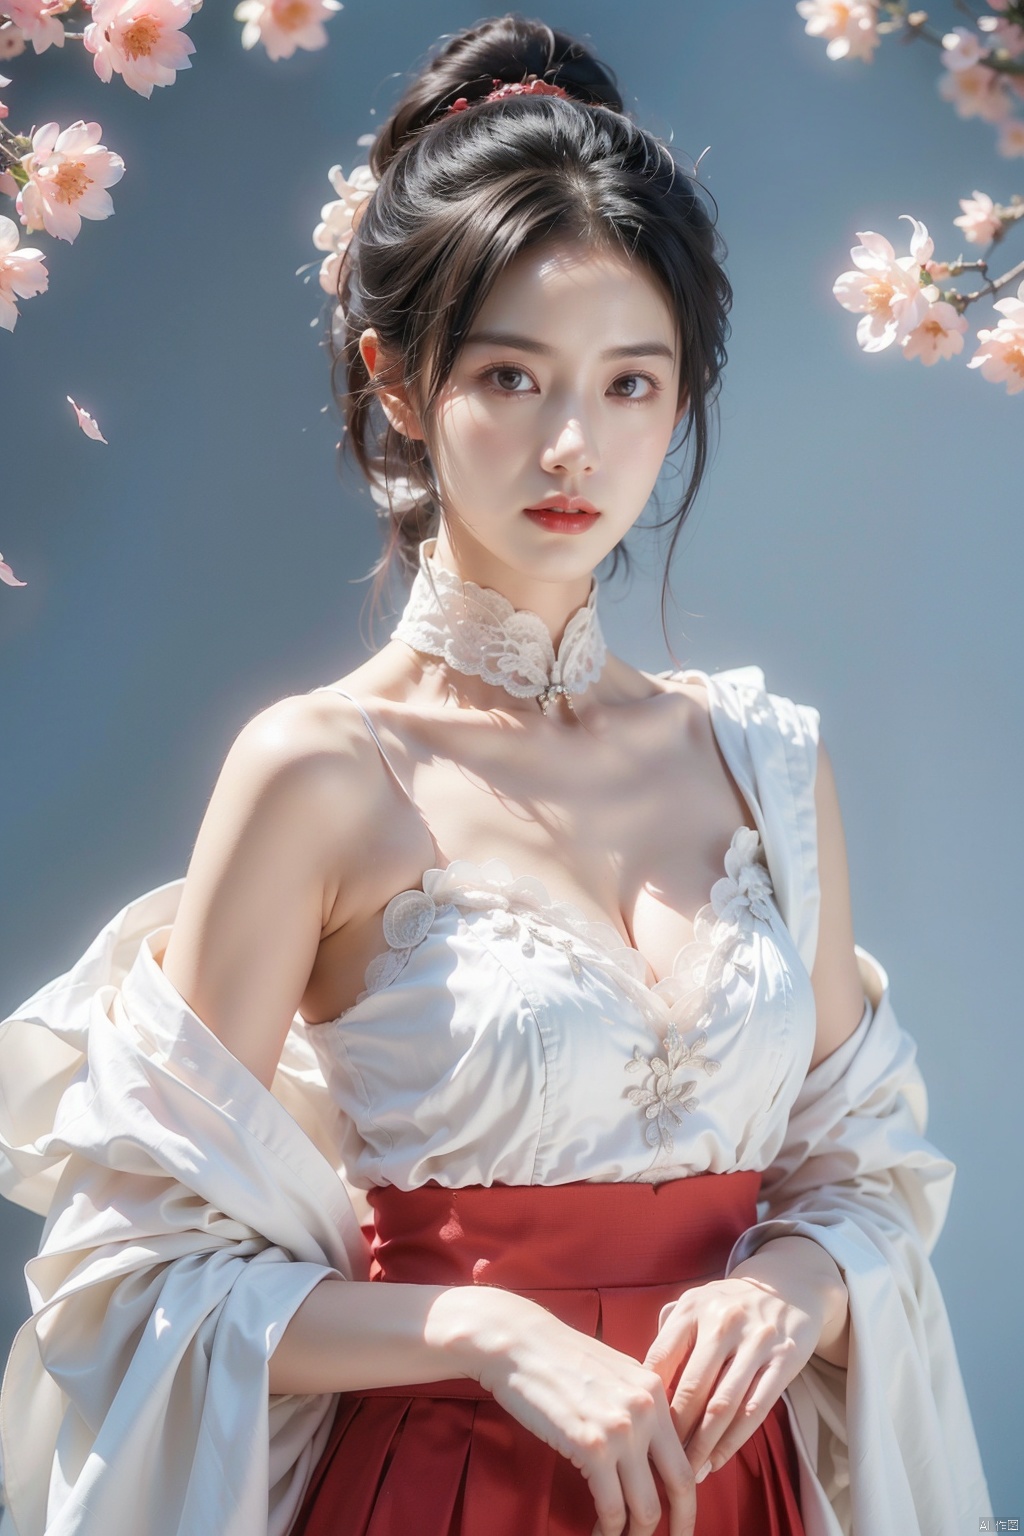 masterpiece, best quality, ultra high res, a seductive woman with a devilish figure and ample cleavage, adorned in a revealing lace hanfu that accentuates her curves, her captivating gaze directed towards the viewer, soft and diffused lighting that highlights her delicate features, blurred background with cherry blossom petals gently falling, professional photography with shallow depth of field, 85mm lens.,,